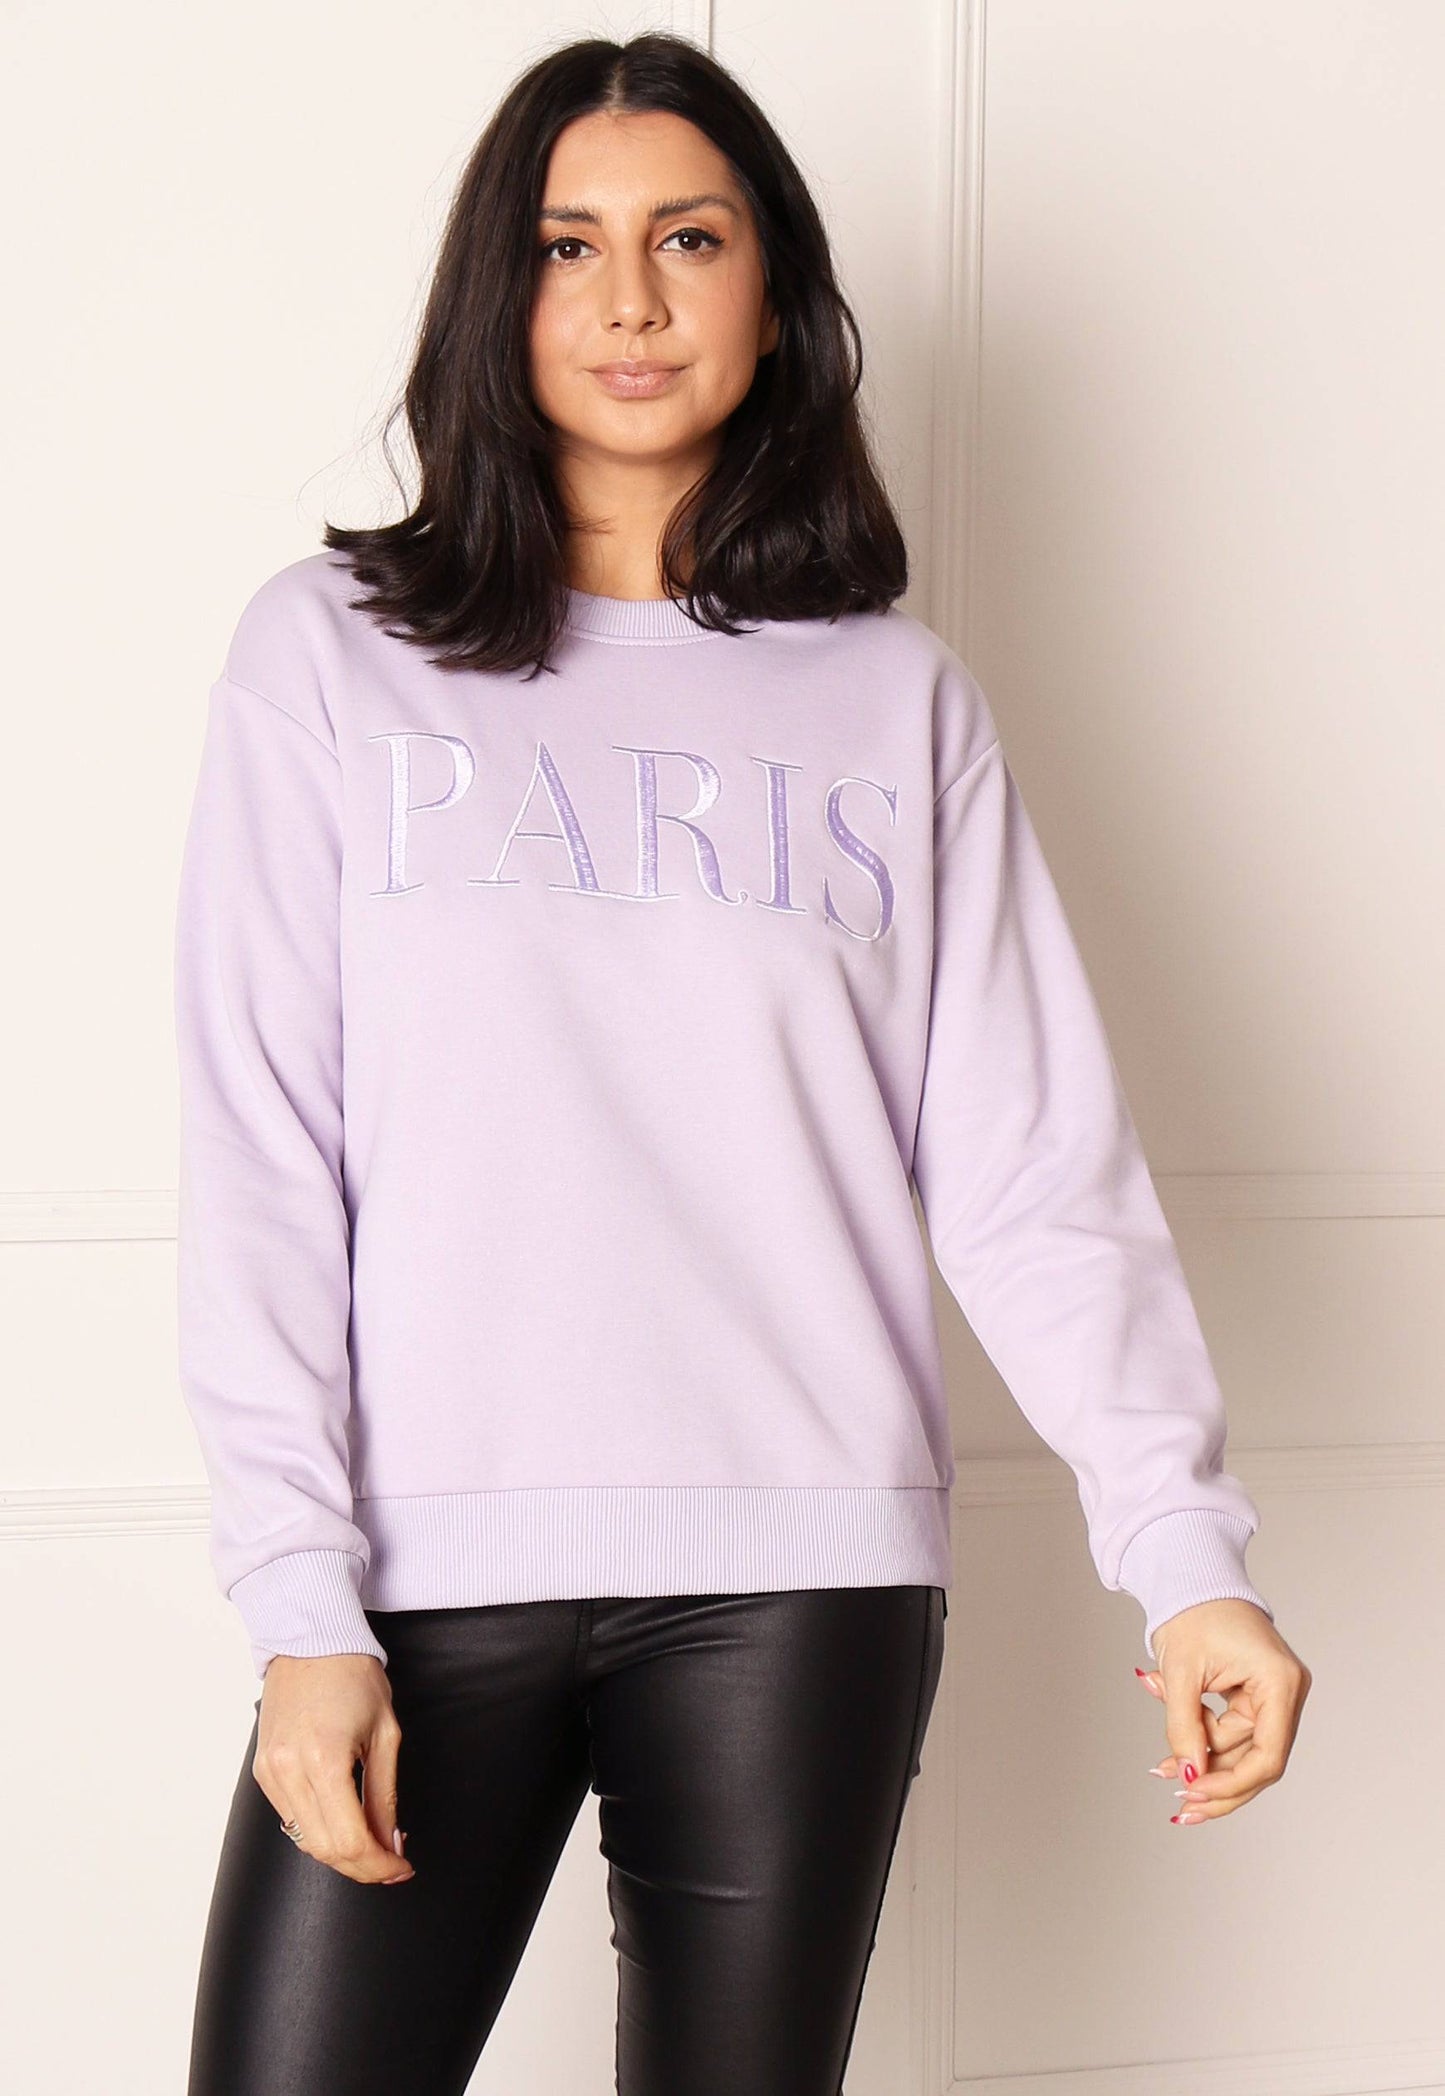 ONLY Paris Embroidered Slogan Sweatshirt in Lilac - One Nation Clothing